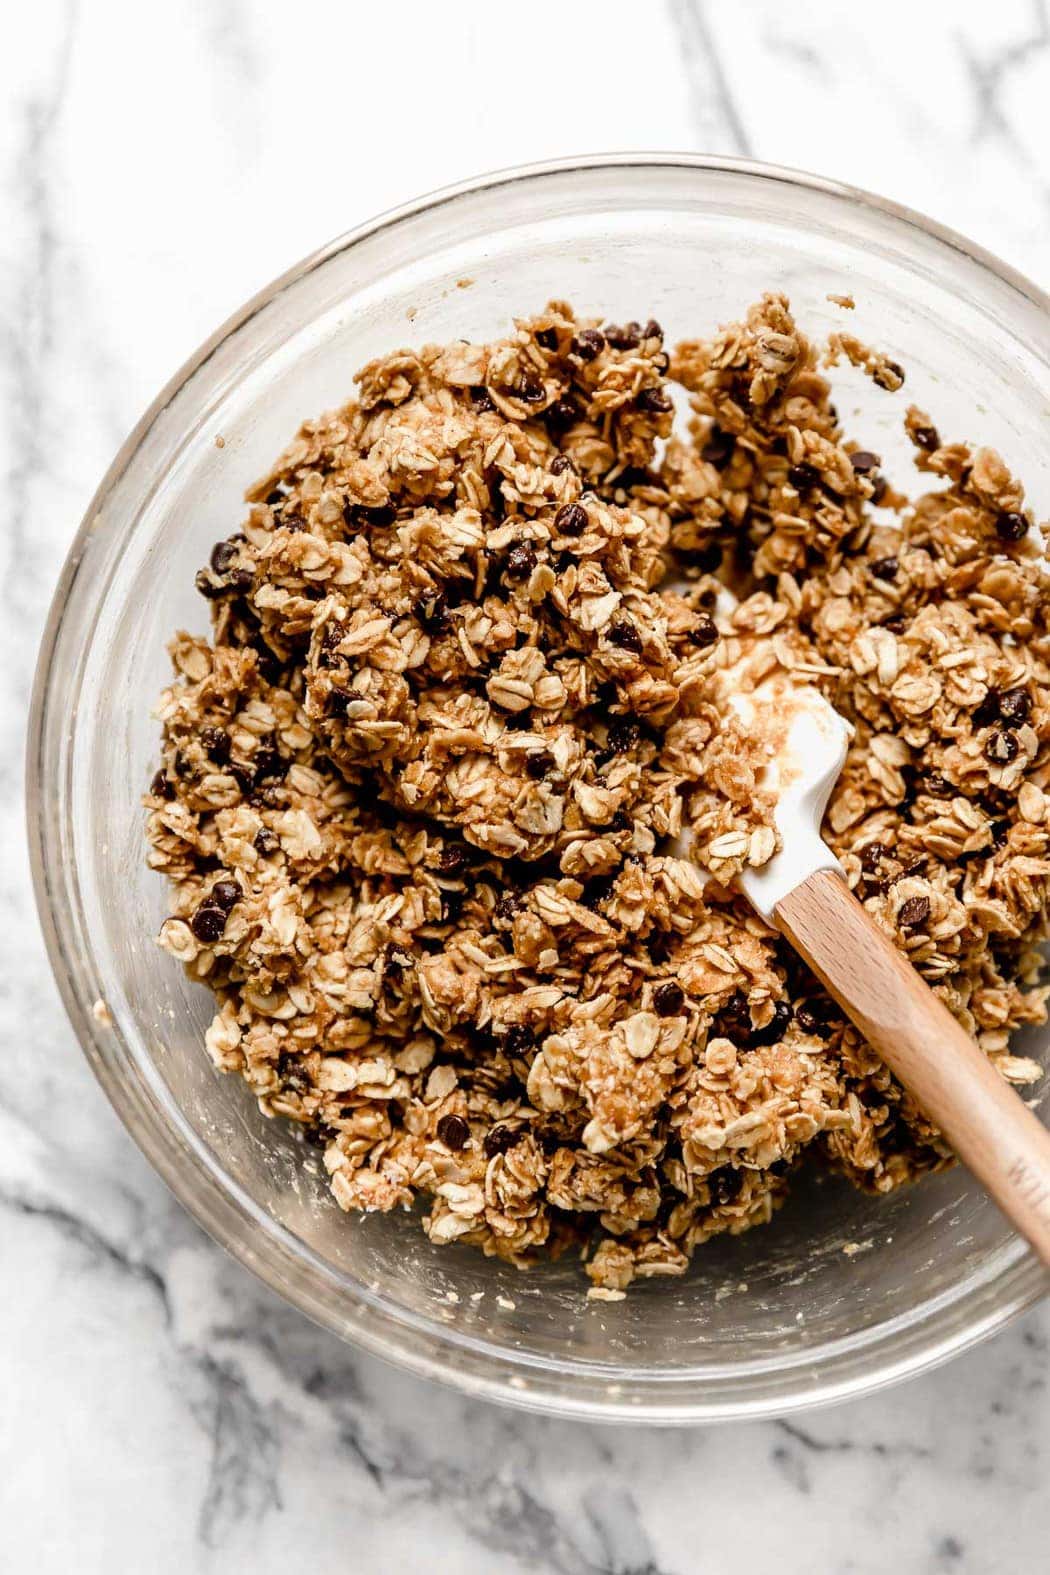 Healthy peanut butter chocolate chip granola bar mixture freshly stirred in a mixing bowl